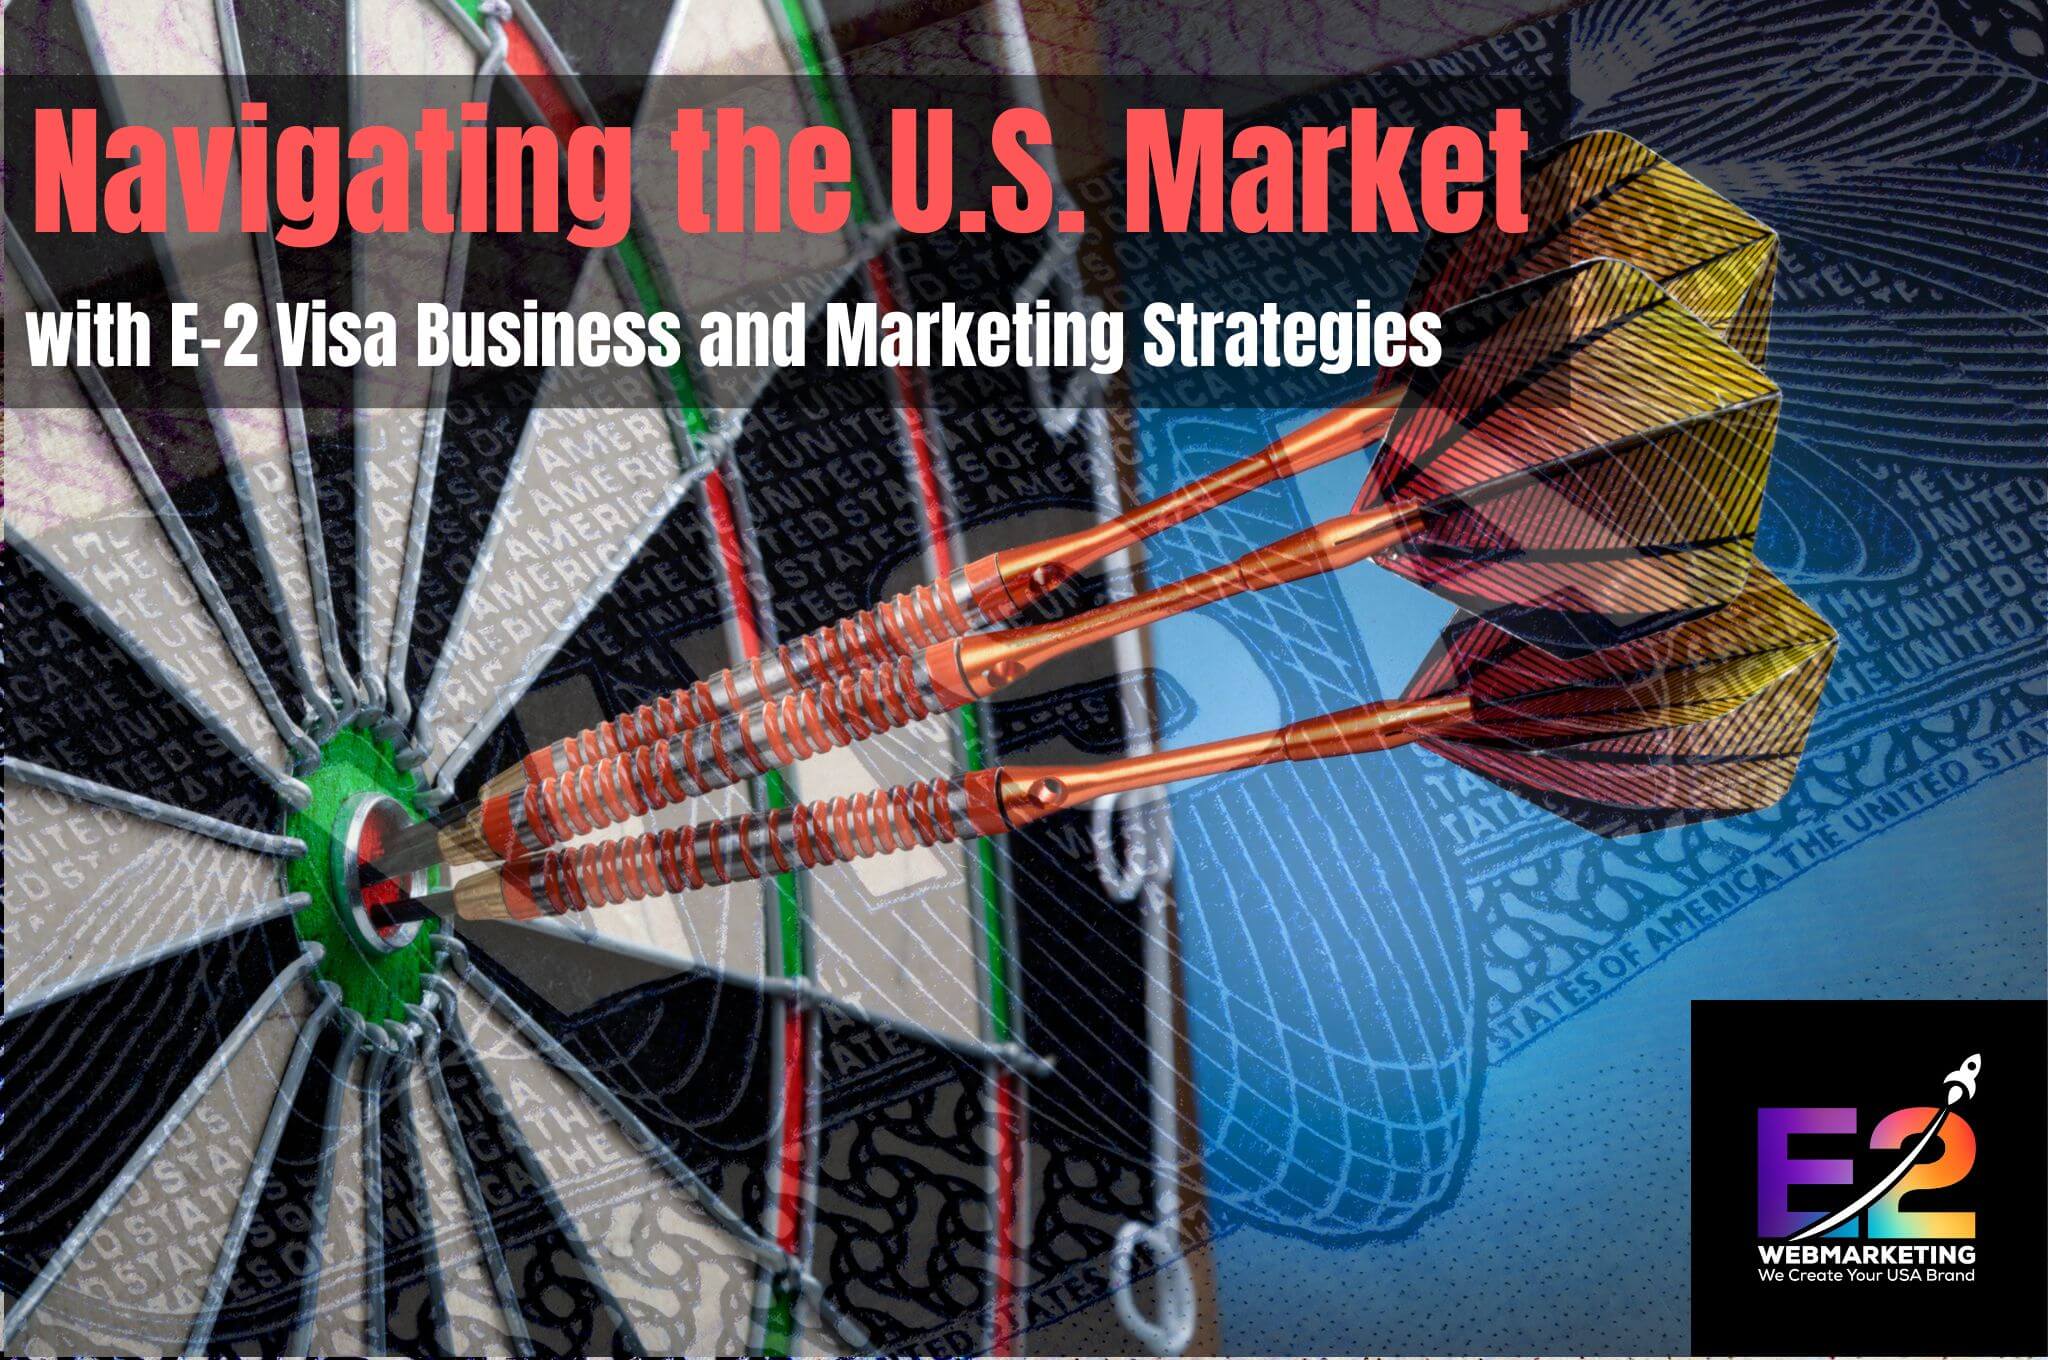 E-2 Visa Marketing Strategies for Entrepreneurs and Startup's in the USA - come and join a vast network of E-2 Visa Professionals - e2webmarketing